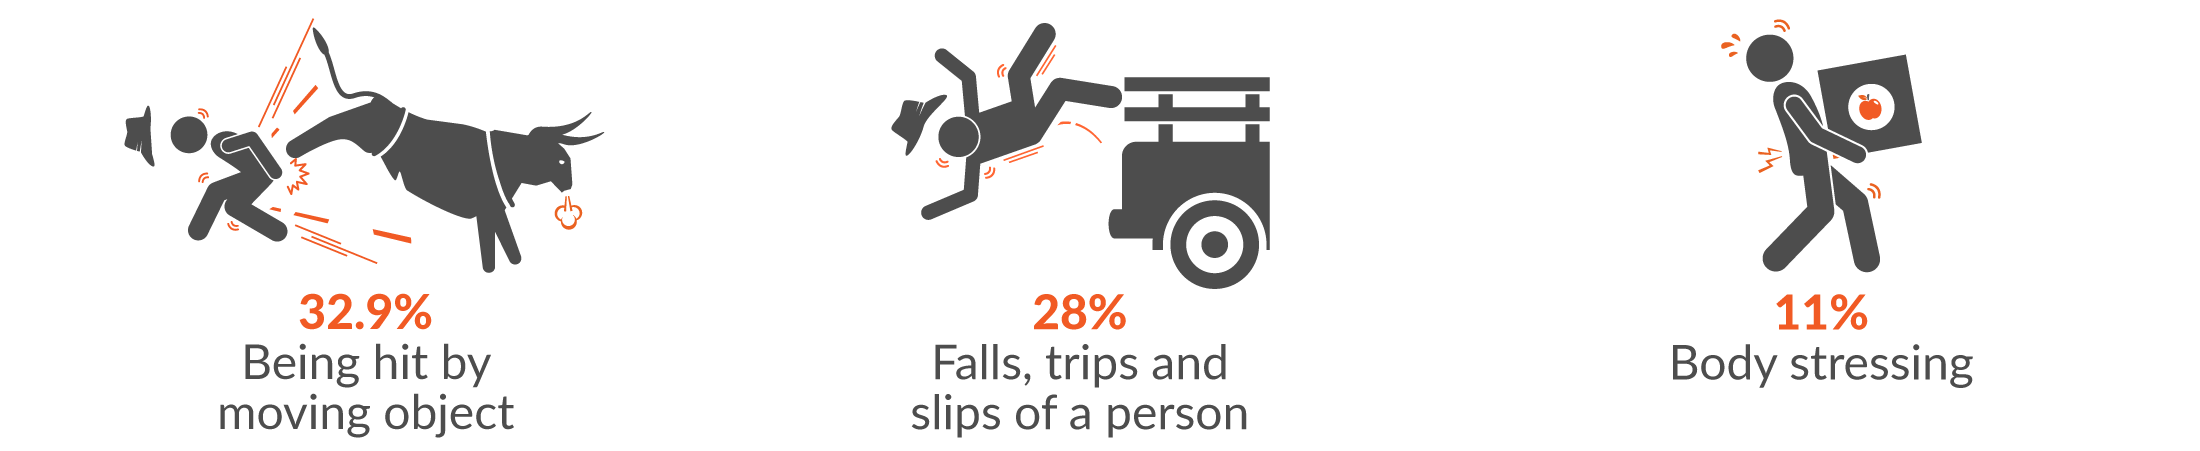 This infographic shows the main three mechanisms of serious injury for Agriculture, forestry and fishing claims were 32.9% being hit by moving object; 28% falls, trips and slips of a person; and 11% body stressing.